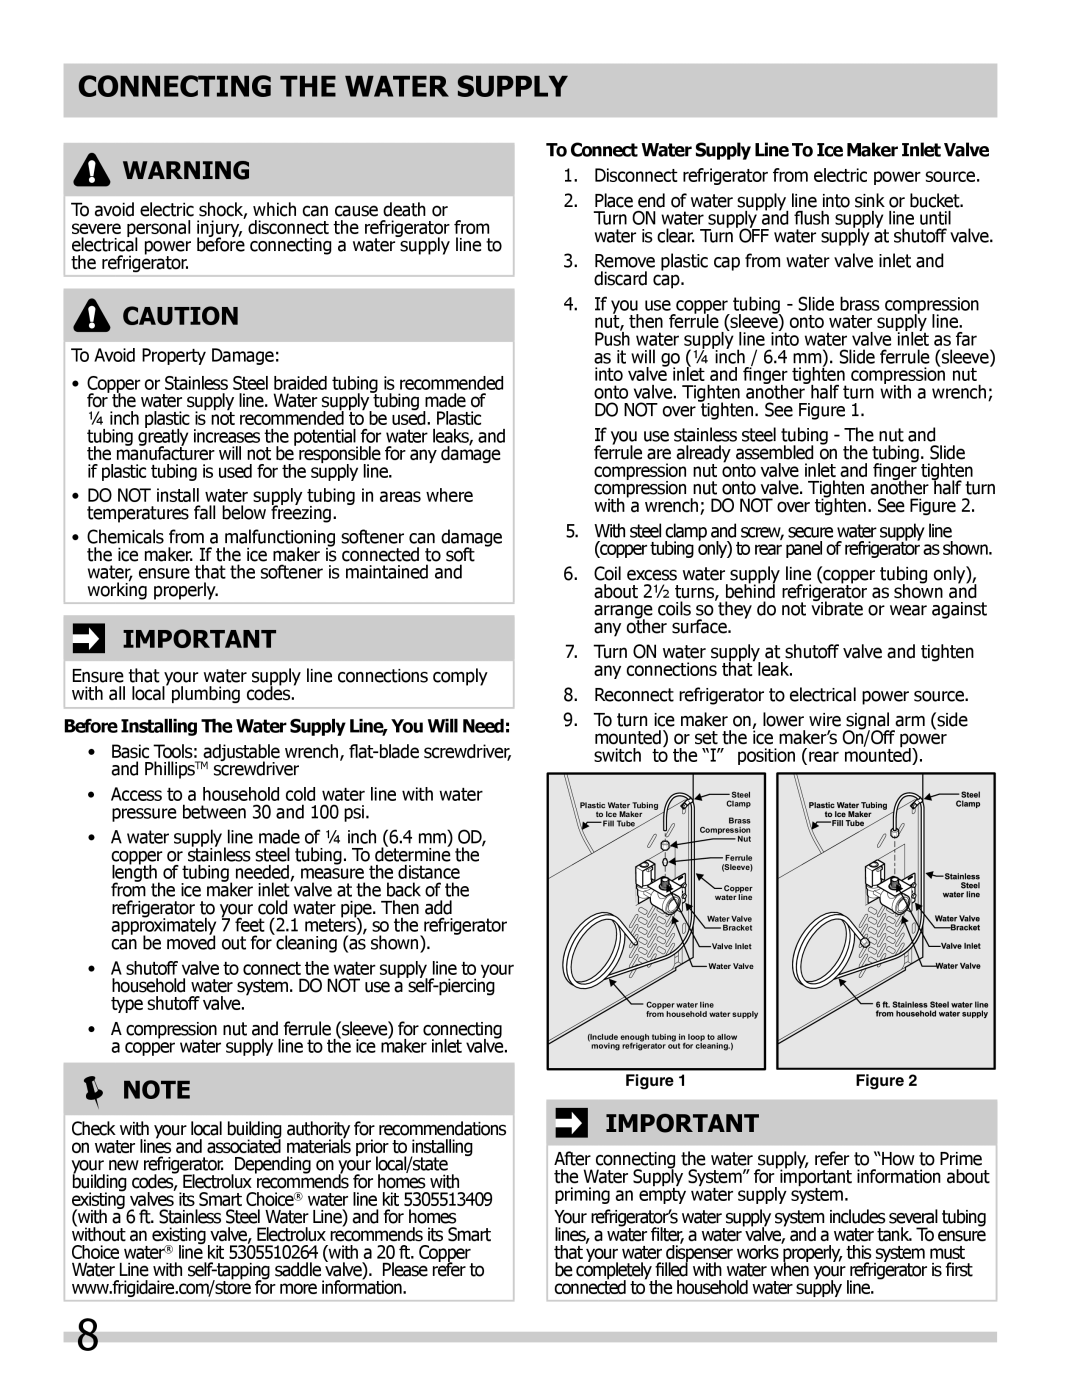 Frigidaire FGUI2149LF important safety instructions Connecting the Water Supply, Note 